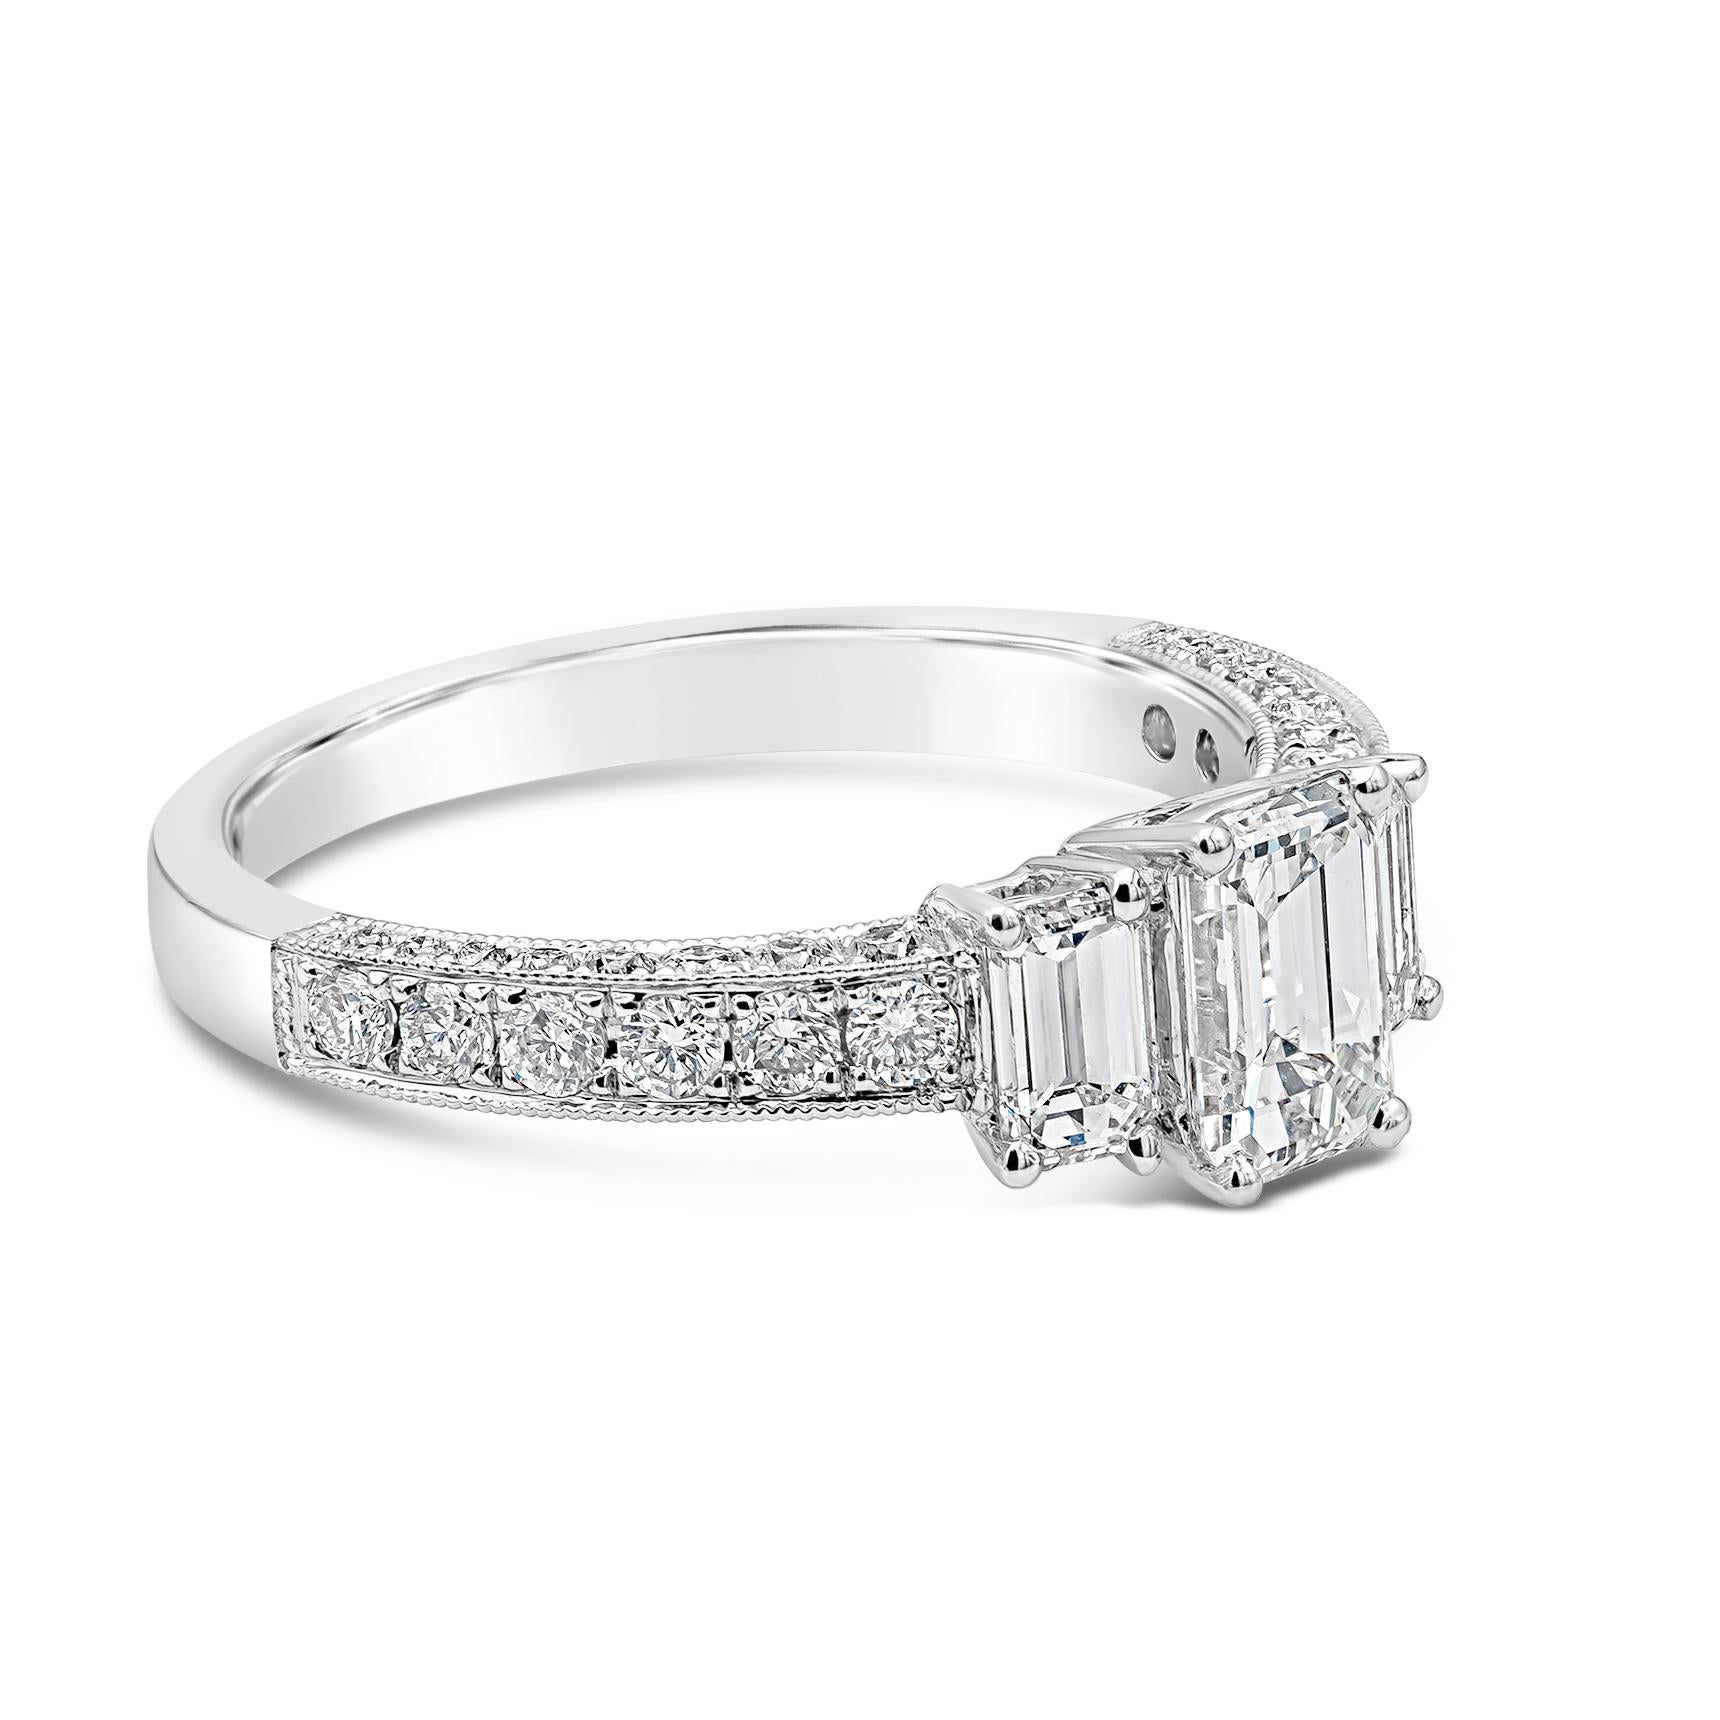 This ring is set with a 0.72 carat emerald cut diamond engagement ring flanked by an emerald cut diamond side stone on each side. Total weight of the side stones is 0.45 carats. 0.48 carats (total) of round brilliant diamonds are also set on the